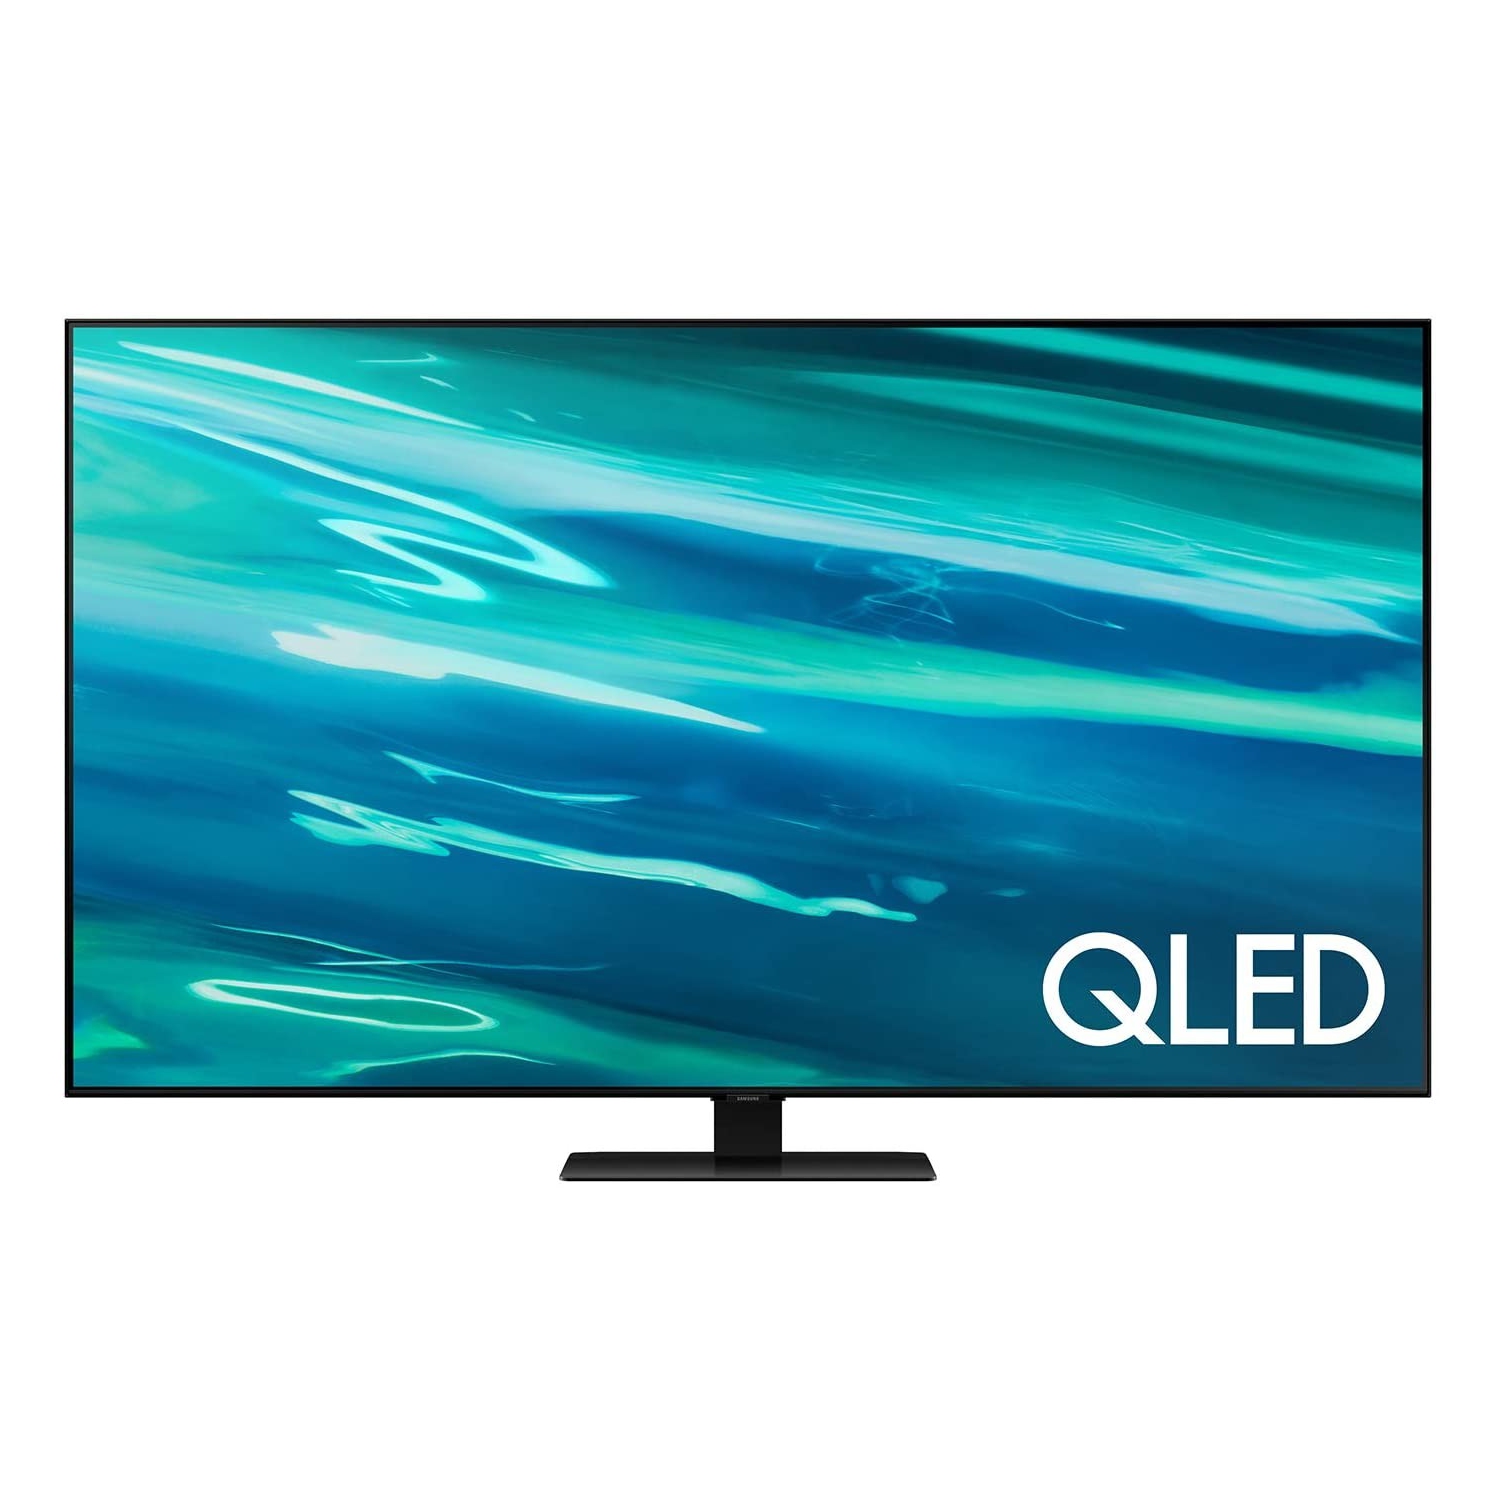 SAMSUNG QN55Q80AA 55" 4K HDR QLED SMART TV Seller Provided Warranty Included